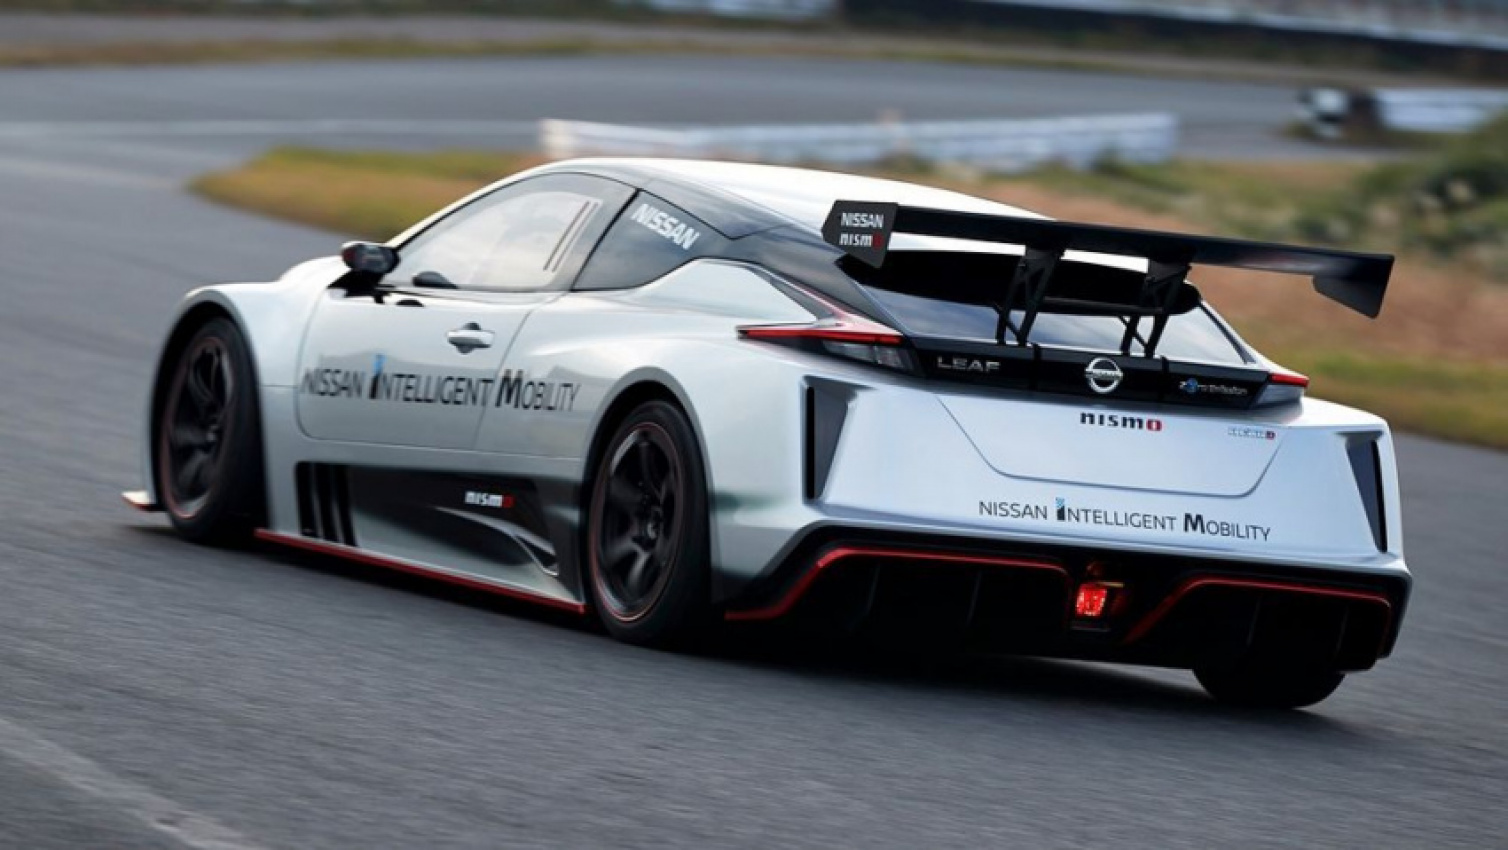 autos, cars, nissan, auto news, leaf, leaf nismo rc, nismo, nissan leaf nismo rc, new nissan leaf nismo rc now with 326 ps, century dash in 3.4 seconds